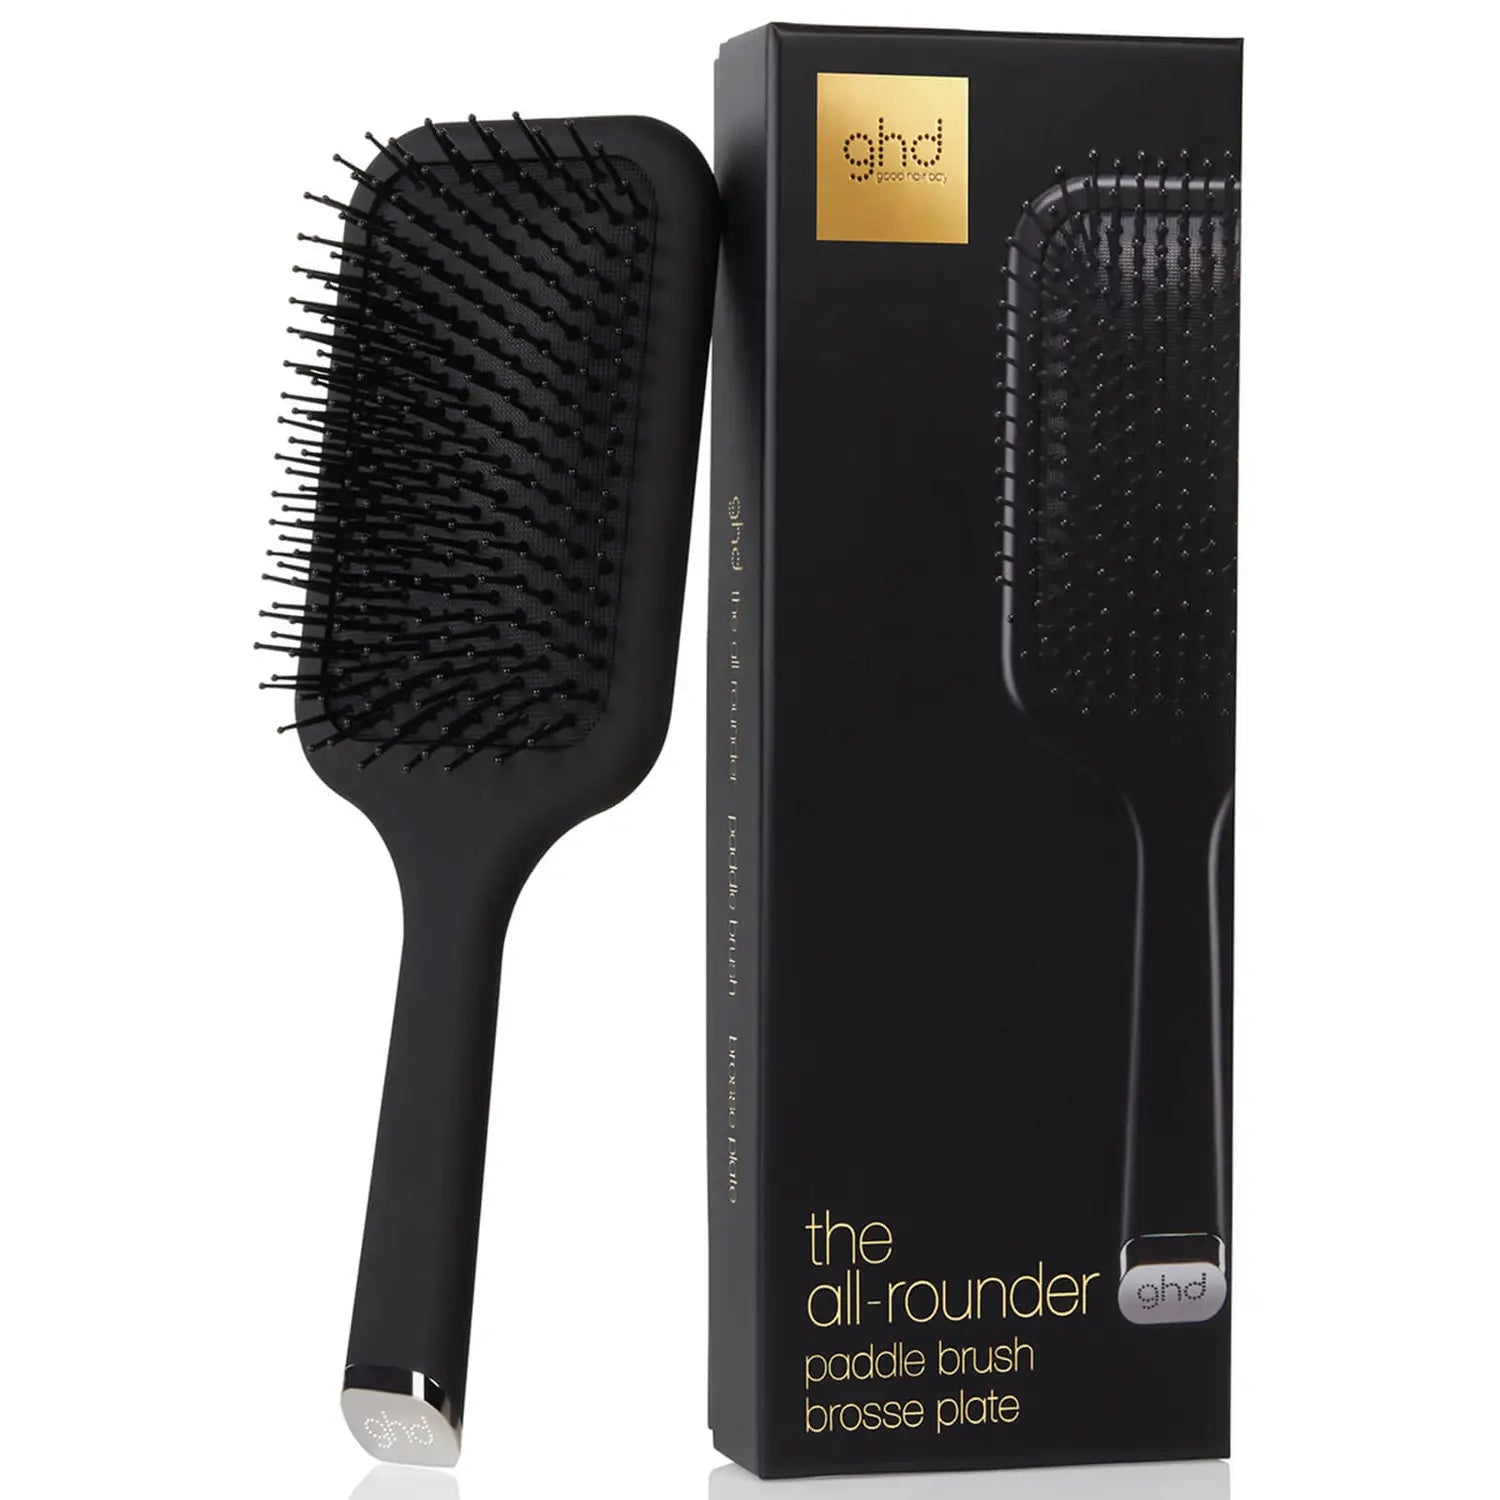 ghd The All Rounder - Paddle Brush, with packaging